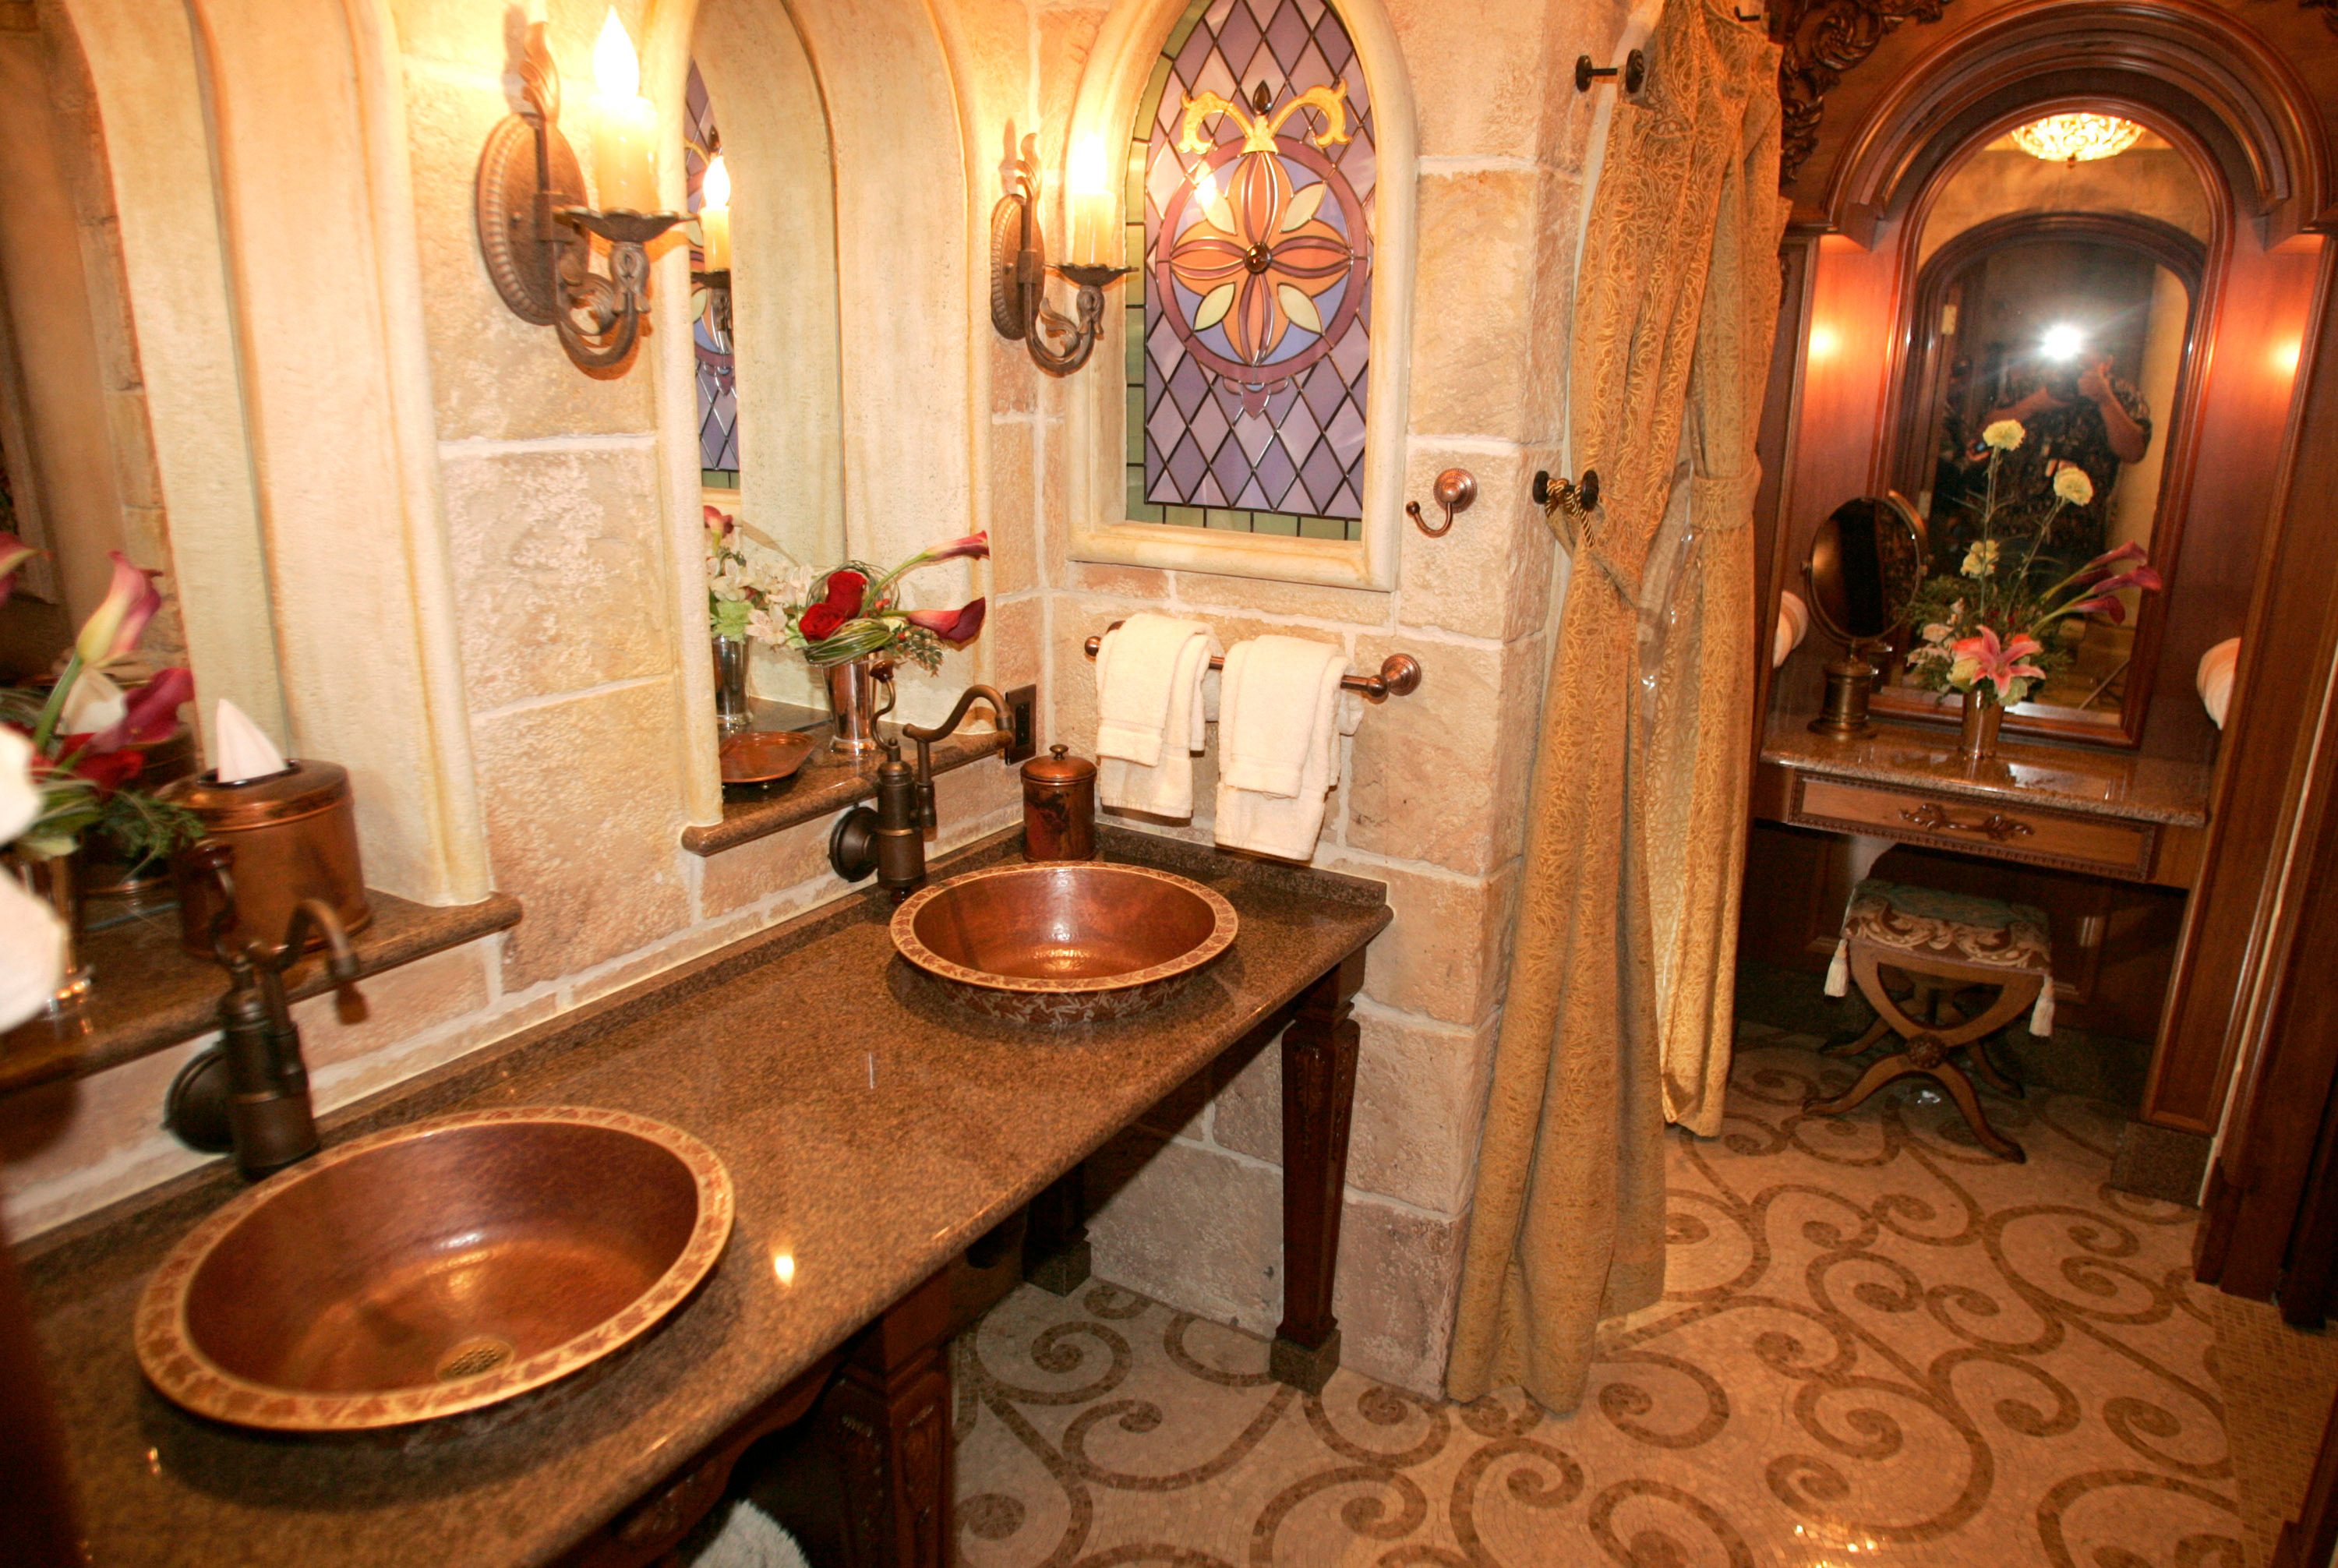 Mandatory Credit: Photo by Reinhold Matay/AP/Shutterstock (6378753d) Disney What's New Views of the private Cinderella luxury suite at the top of Cinderella's Castle at Walt Disney World's Magic Kingdom in Lake Buena Vista, Fla. are seen on Friday, Jan. 26,2006. A night's stay at the castle was one of prizes given randomly to unsuspecting park guests recently as part of the launch of Disney's "Year of a Million Dreams" campaign Disney What's New, Lake Buena Vista, USA